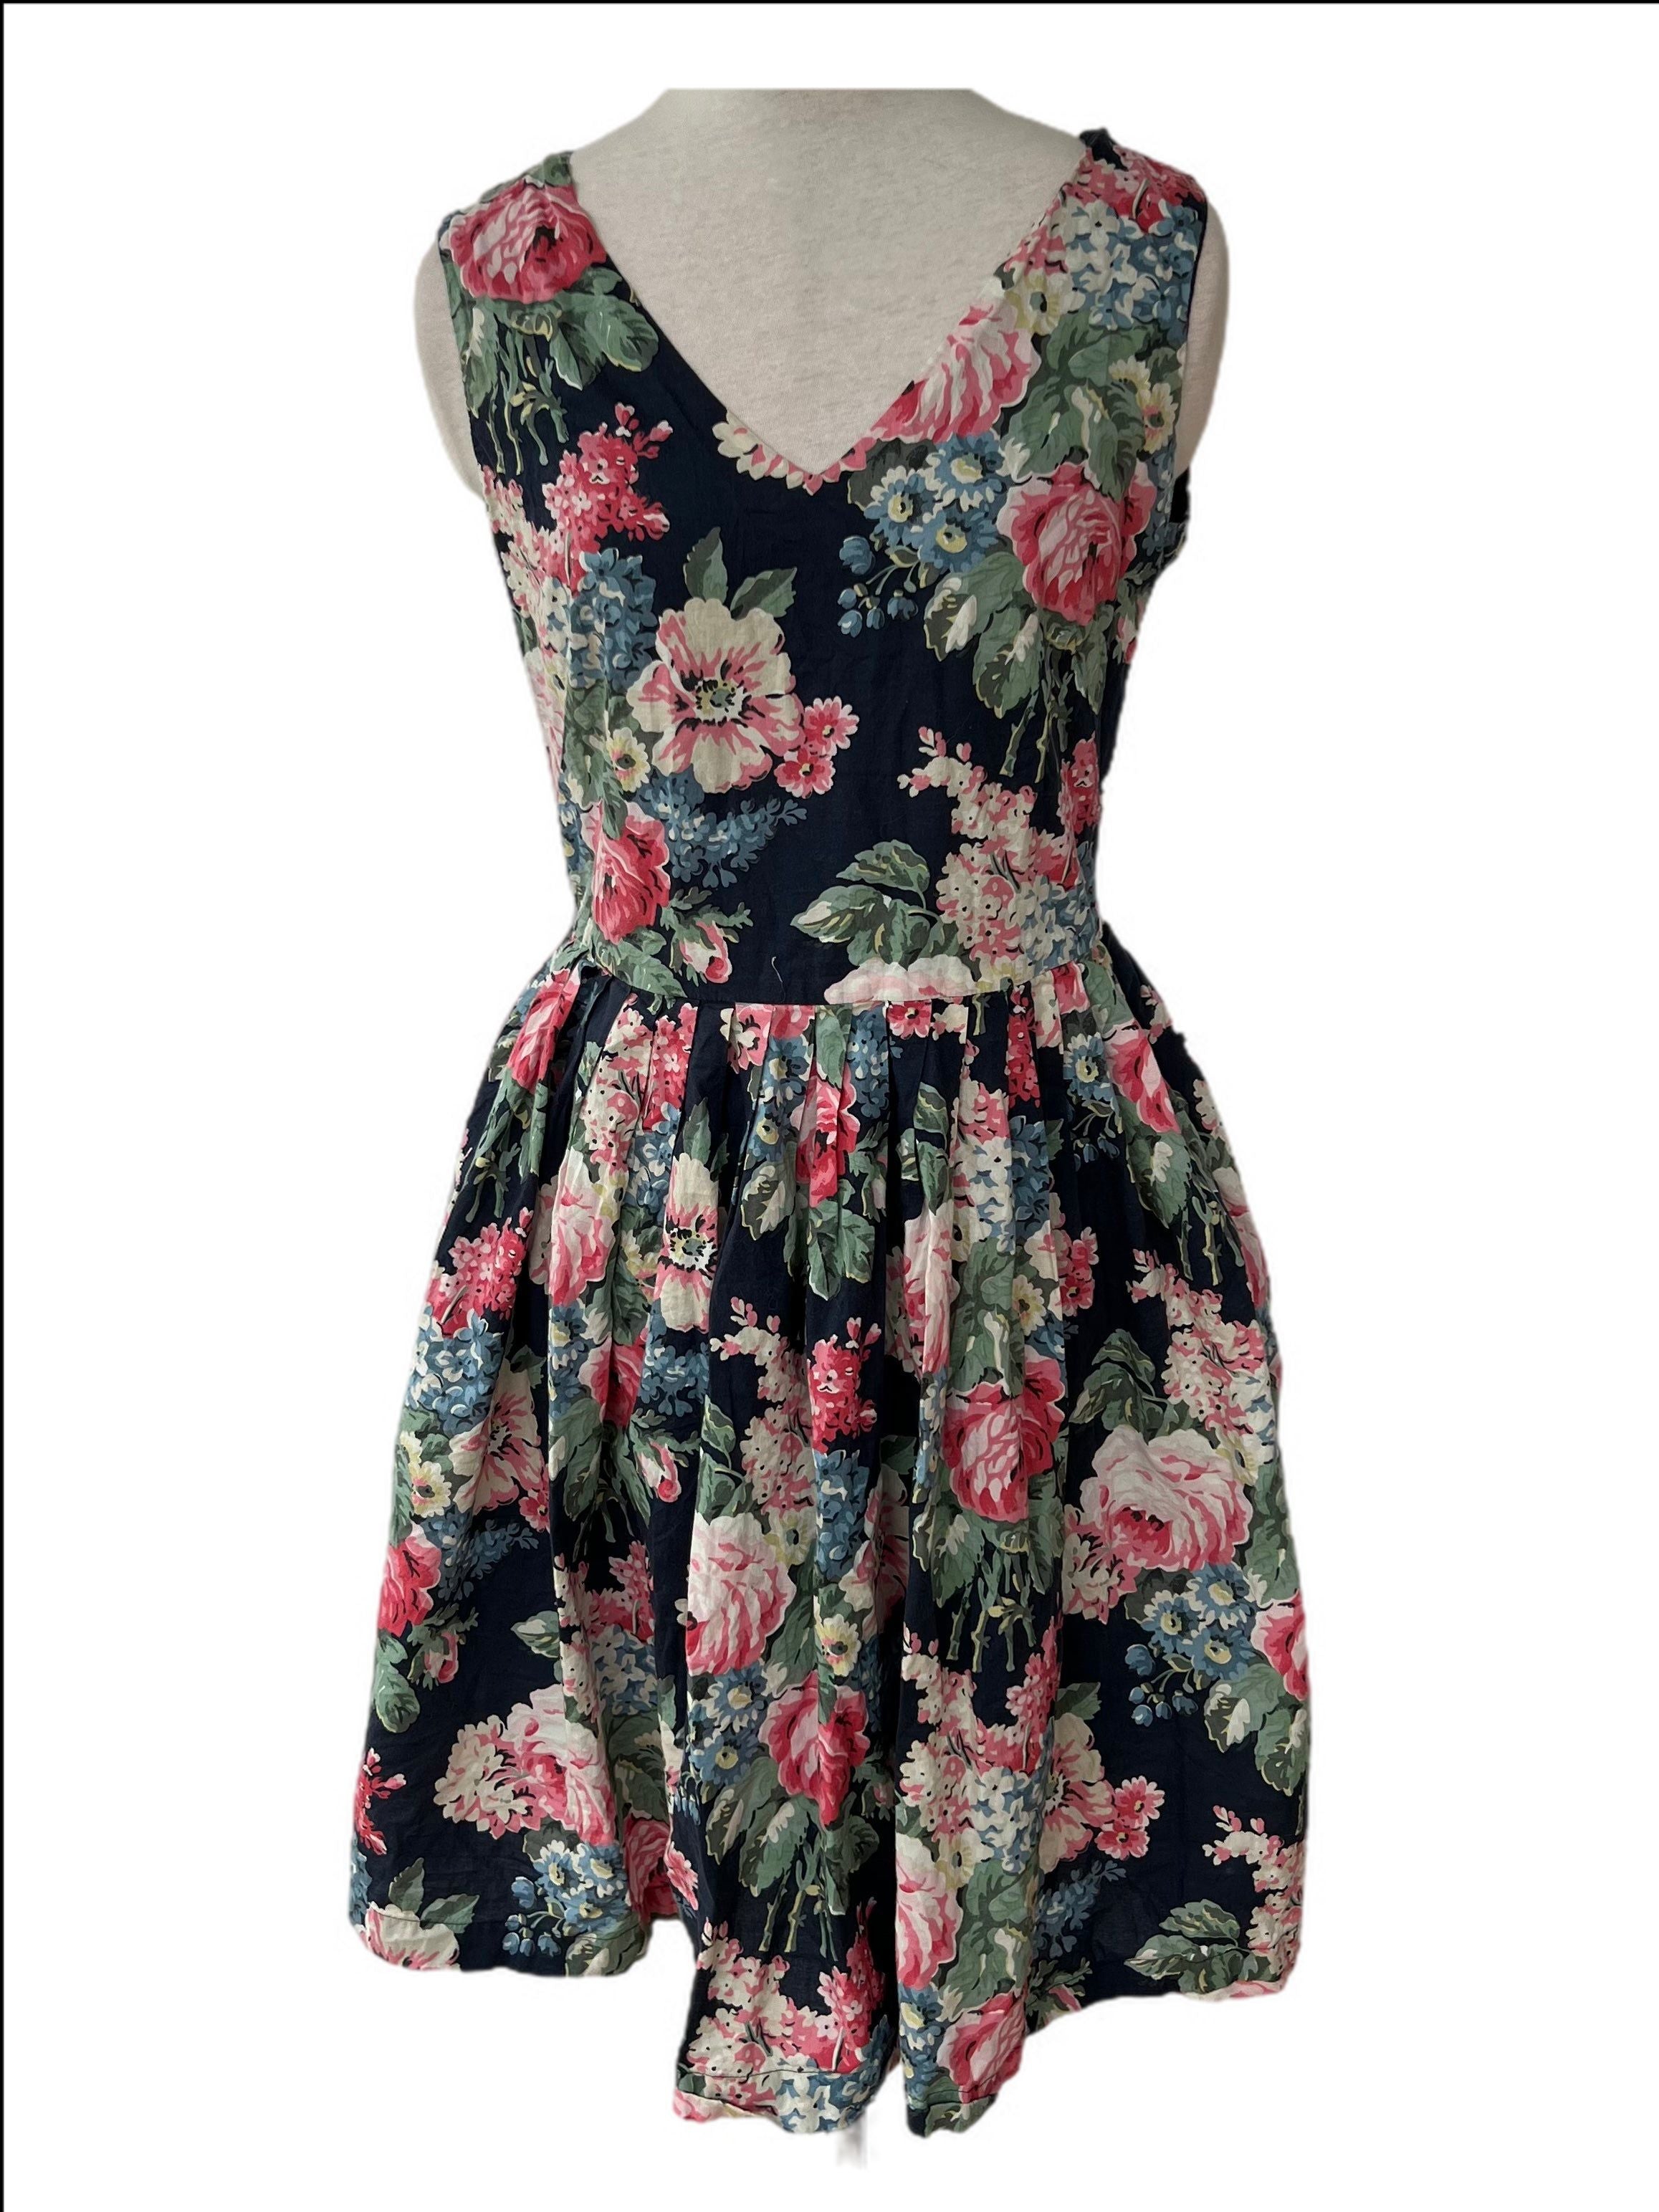 Rare Bloomsbury Bouquet Vintage 1950s Style English Rose Dress, with Pockets